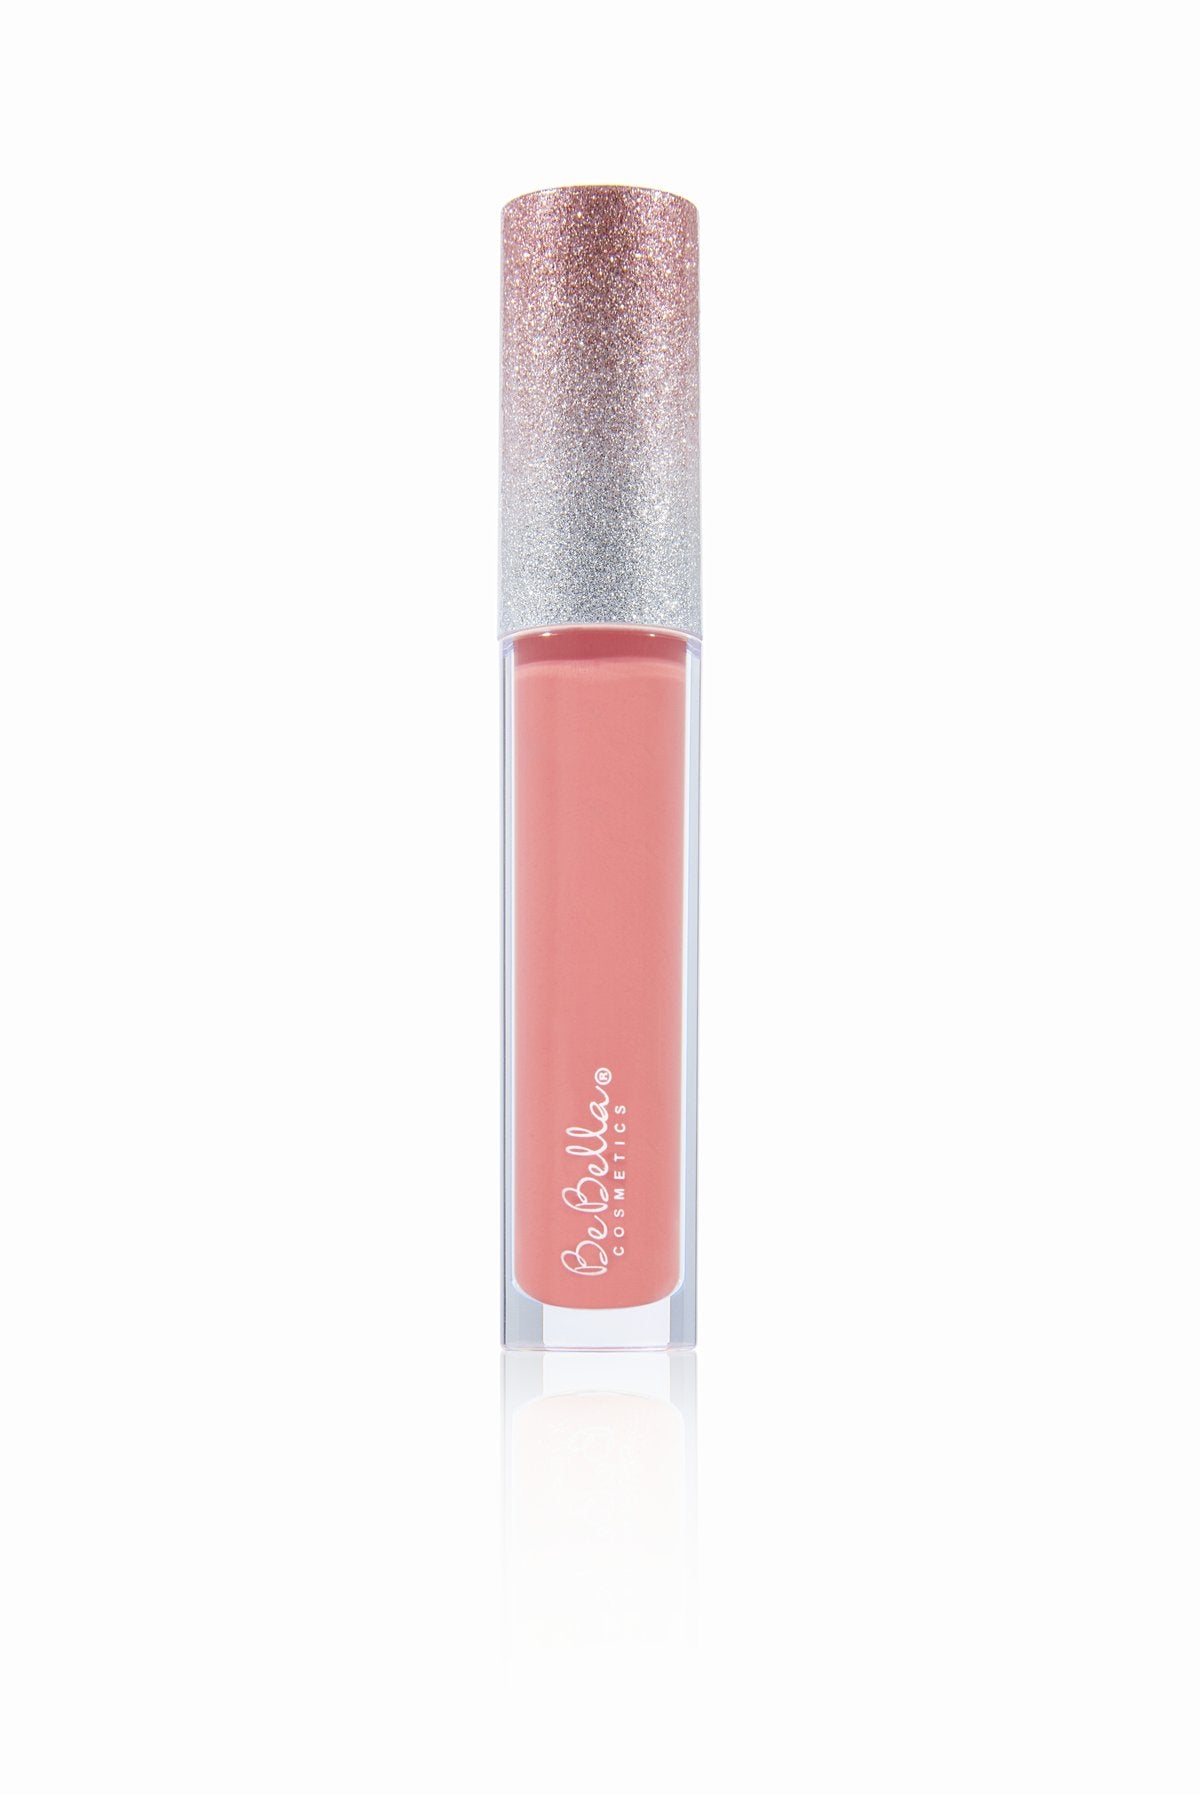 BeBella Cosmetics - Luxe Lip Gloss Coming Out